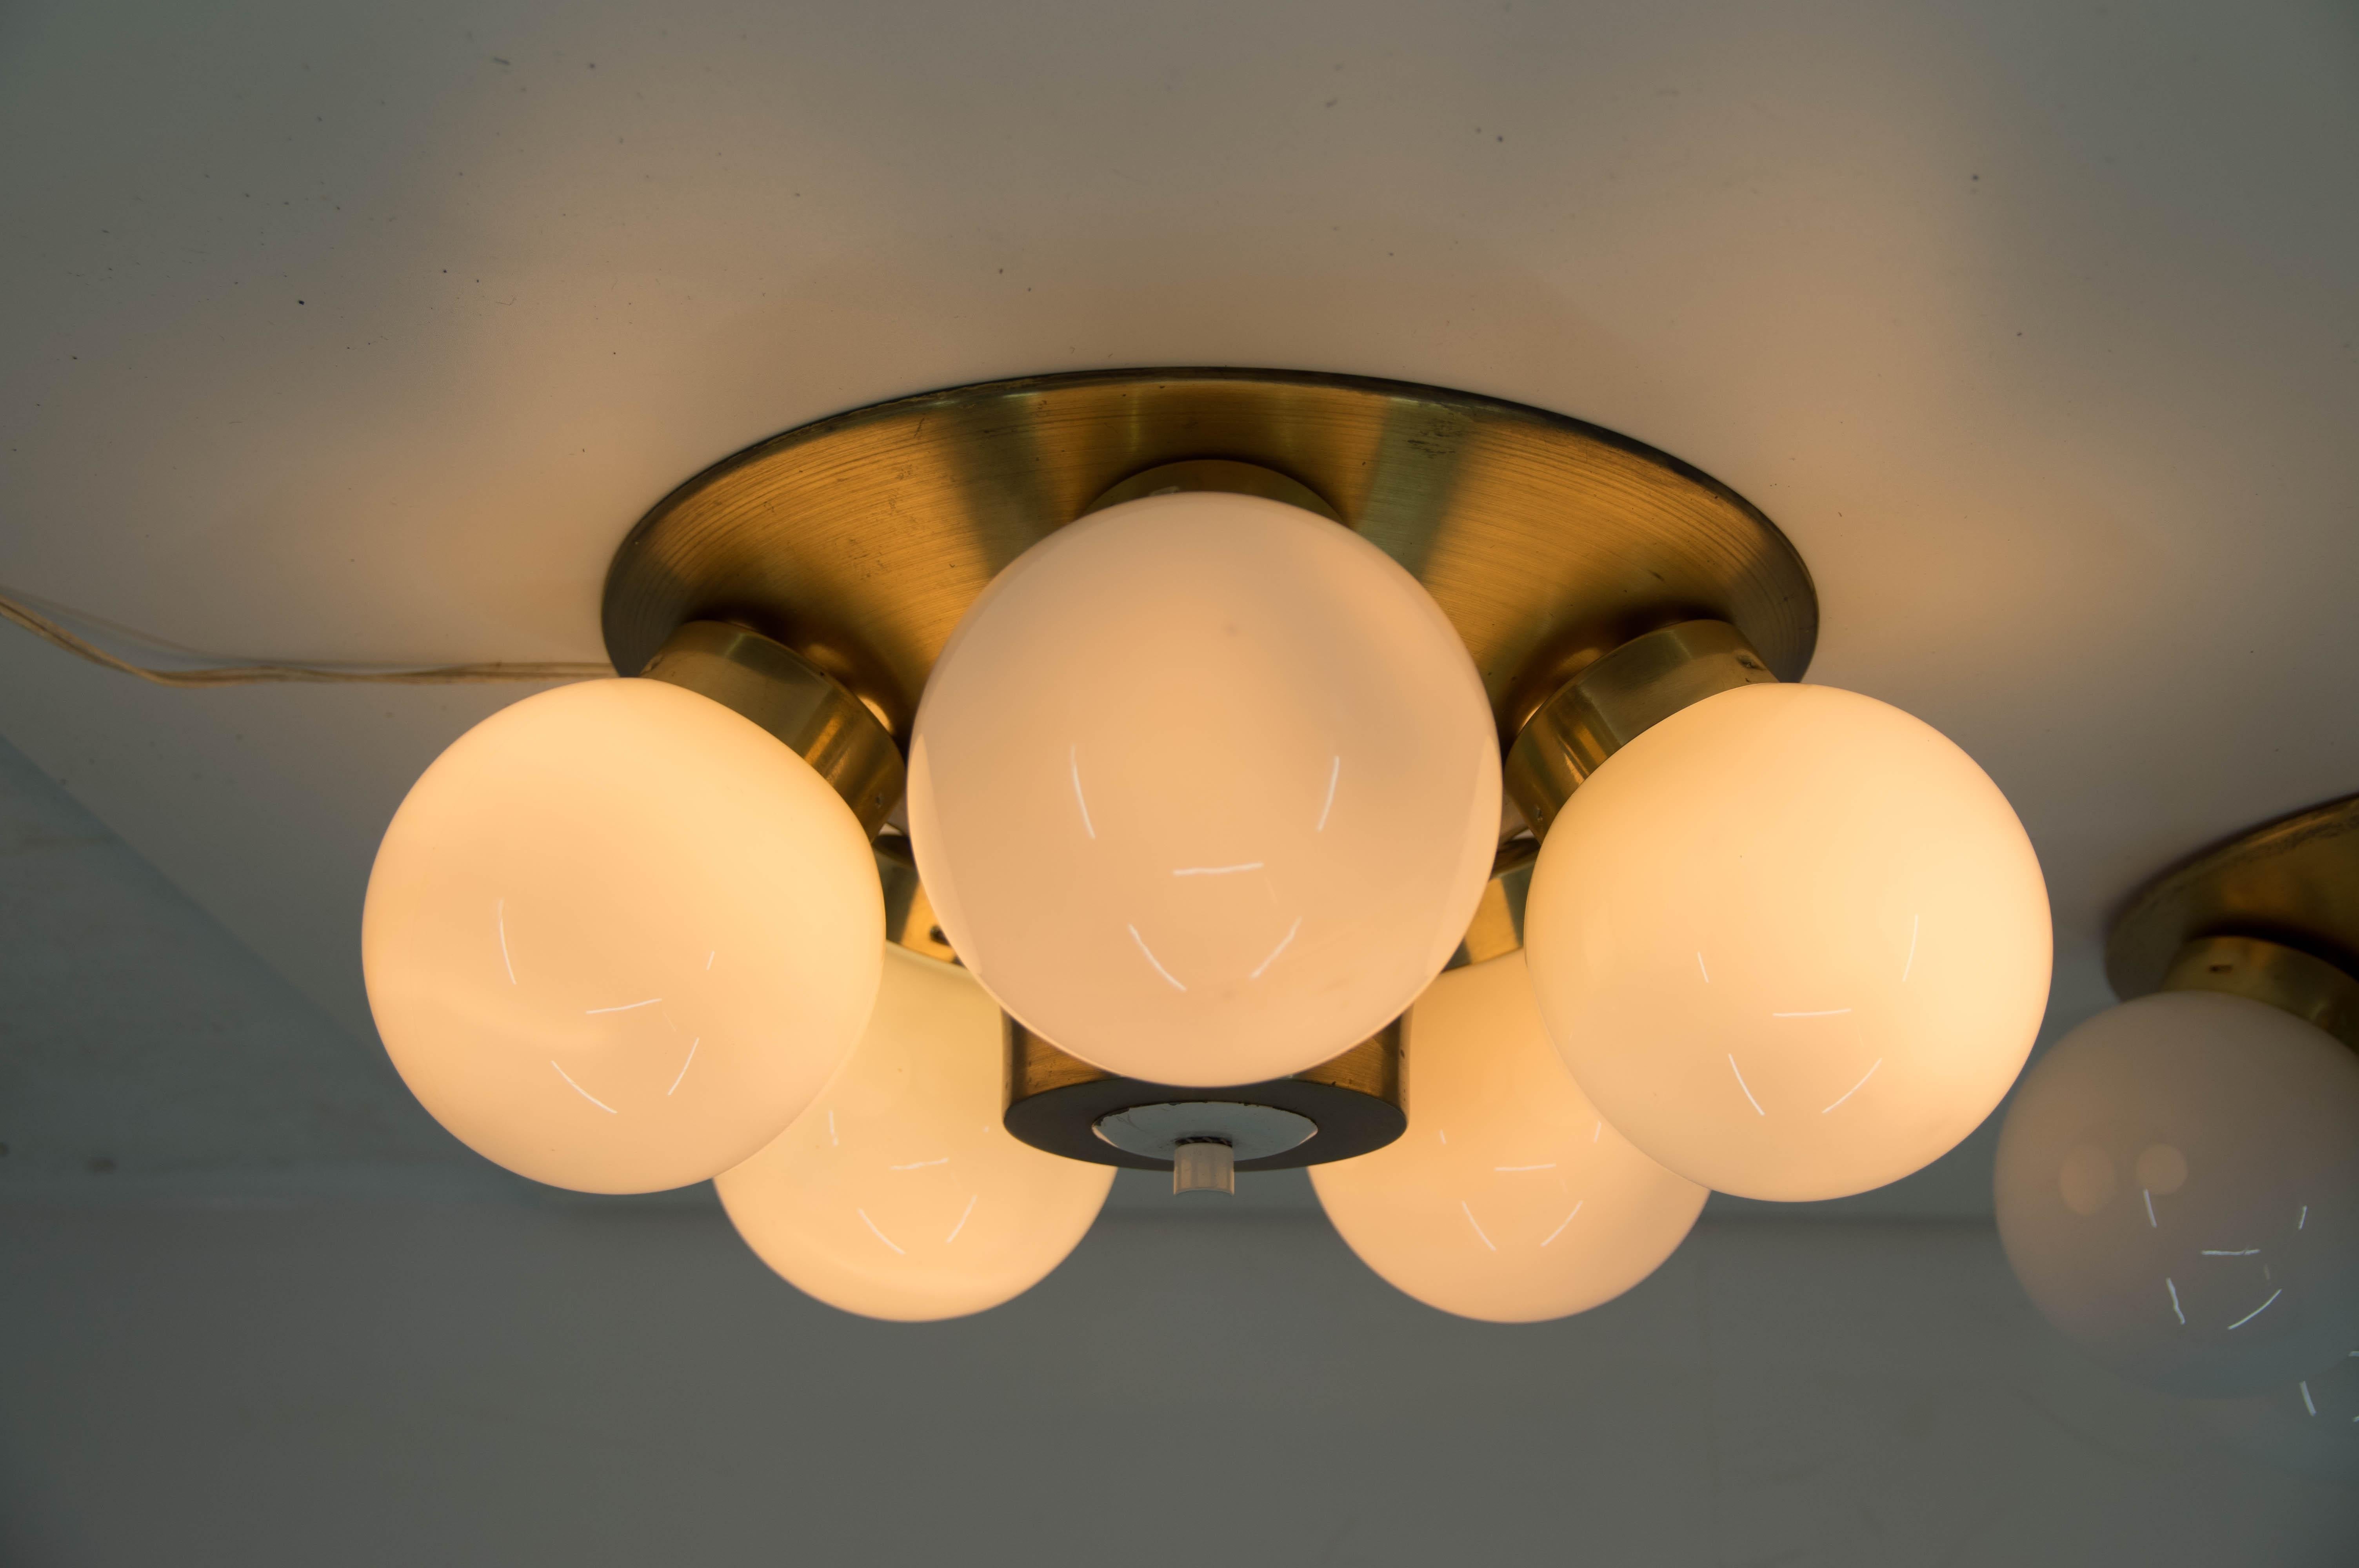 Flushmount type 77 315, made by Elektroinstala Decin in Czechoslovakia in 1970s
Made of brass and opaline glass.
Re-polished, rewired
5 x 60 W, E27 or E26 bulbs.